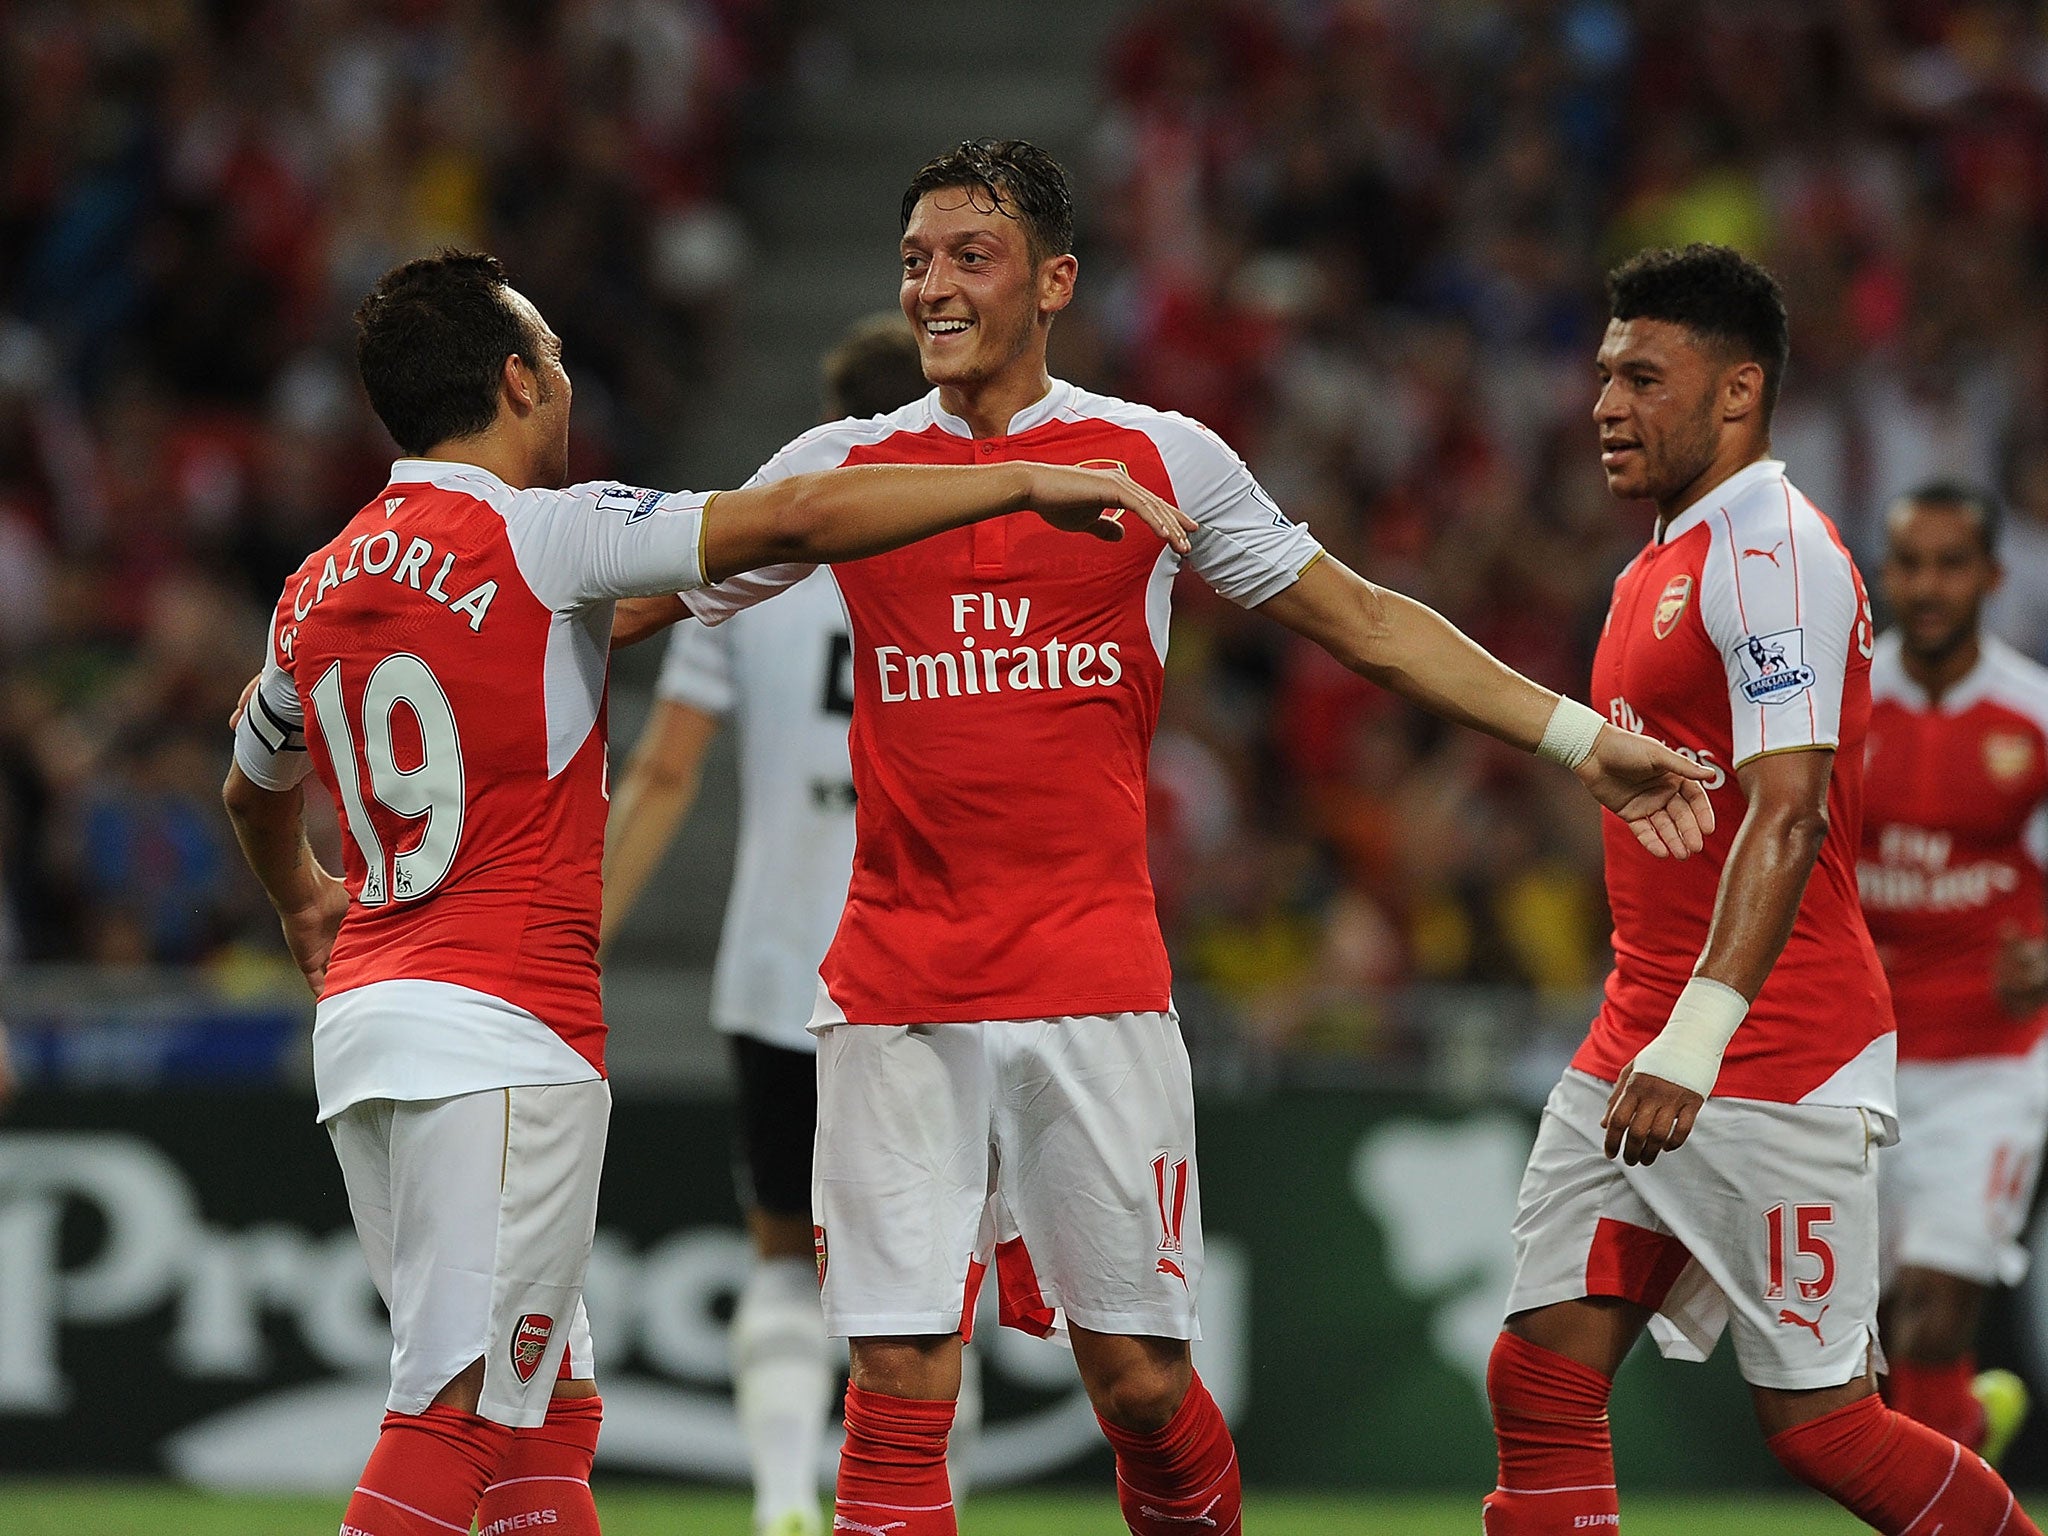 Is Ozil (centre) in our combined XI?